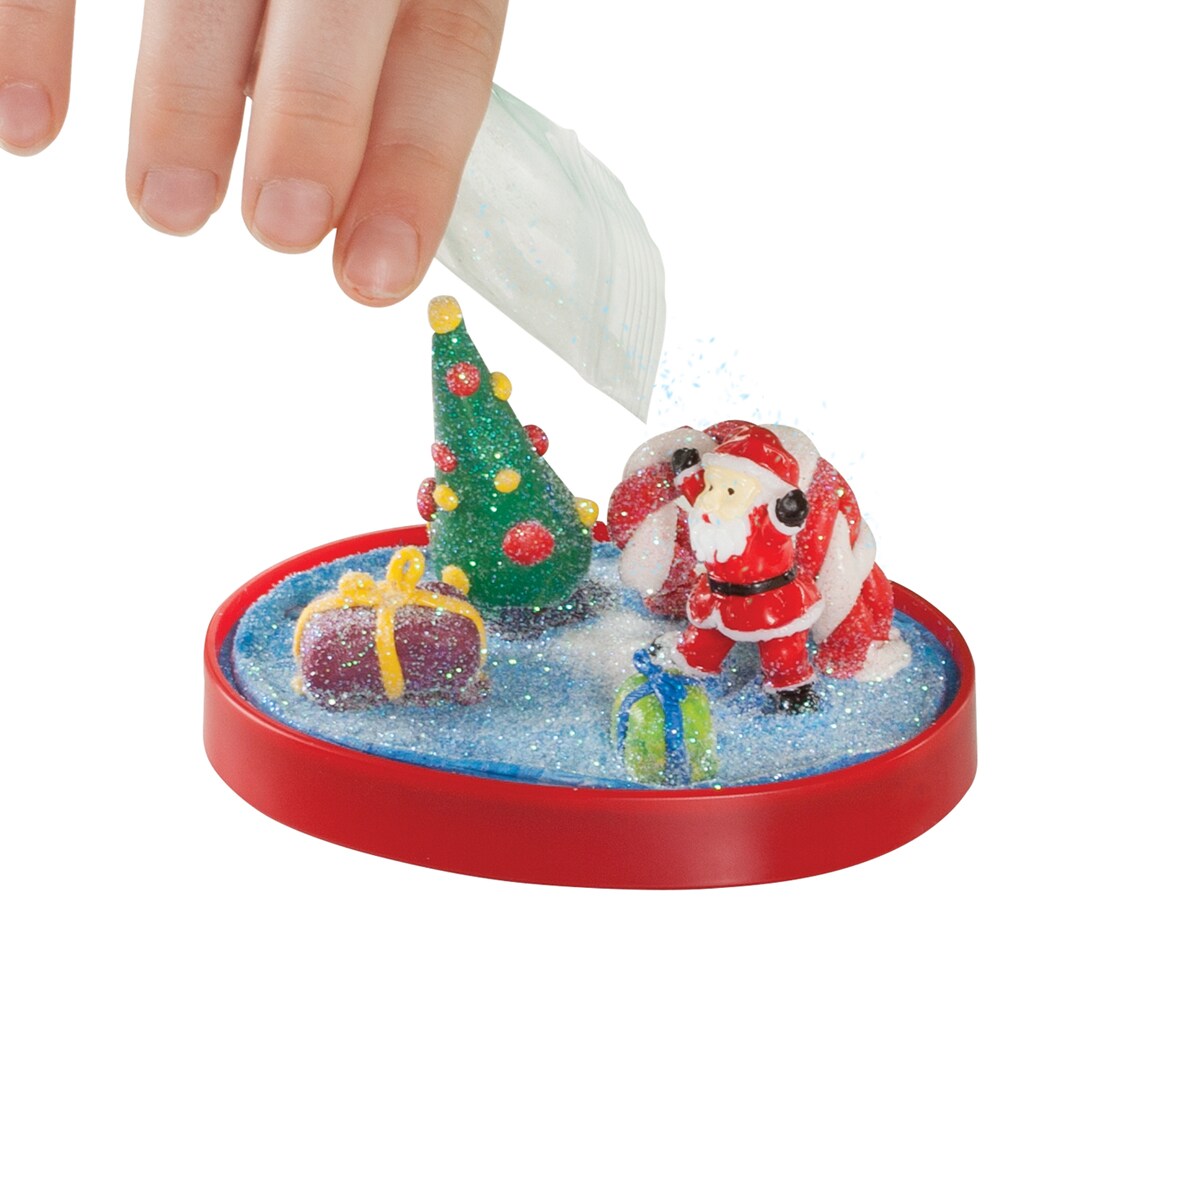 Faber-Castell Creativity for Kids Make Your Own Holiday Snow 